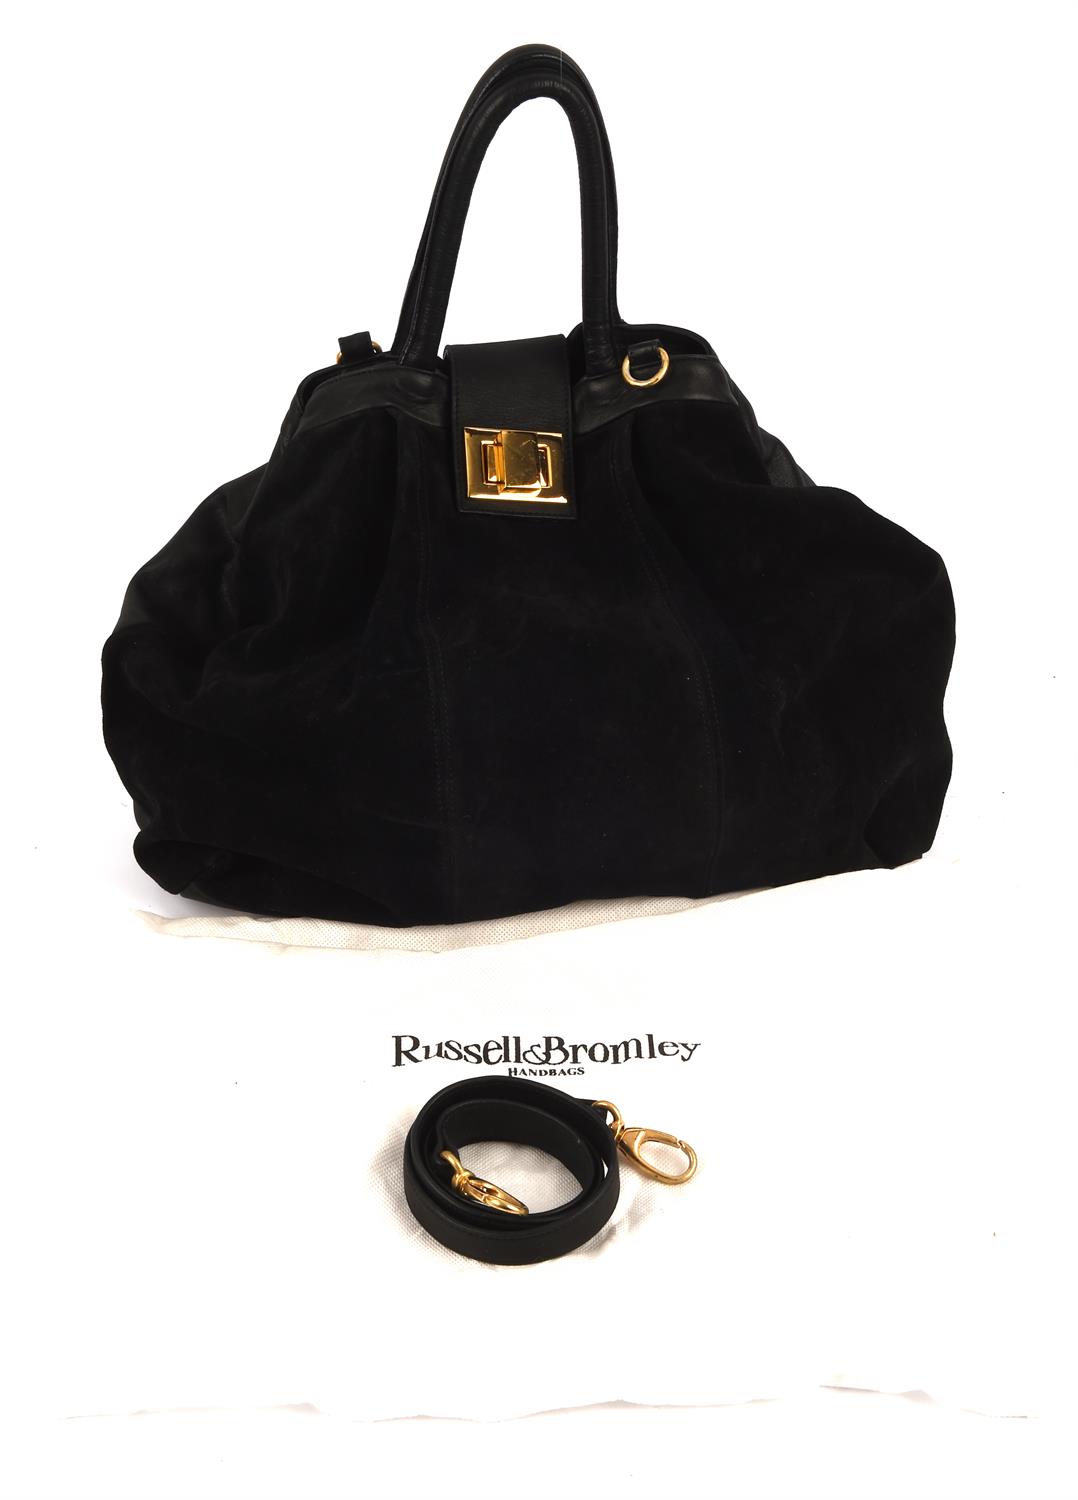 RUSSELL & BROMLEY 1990s a large vintage black leather and suede tote handbag with gold hardware and - Image 6 of 6